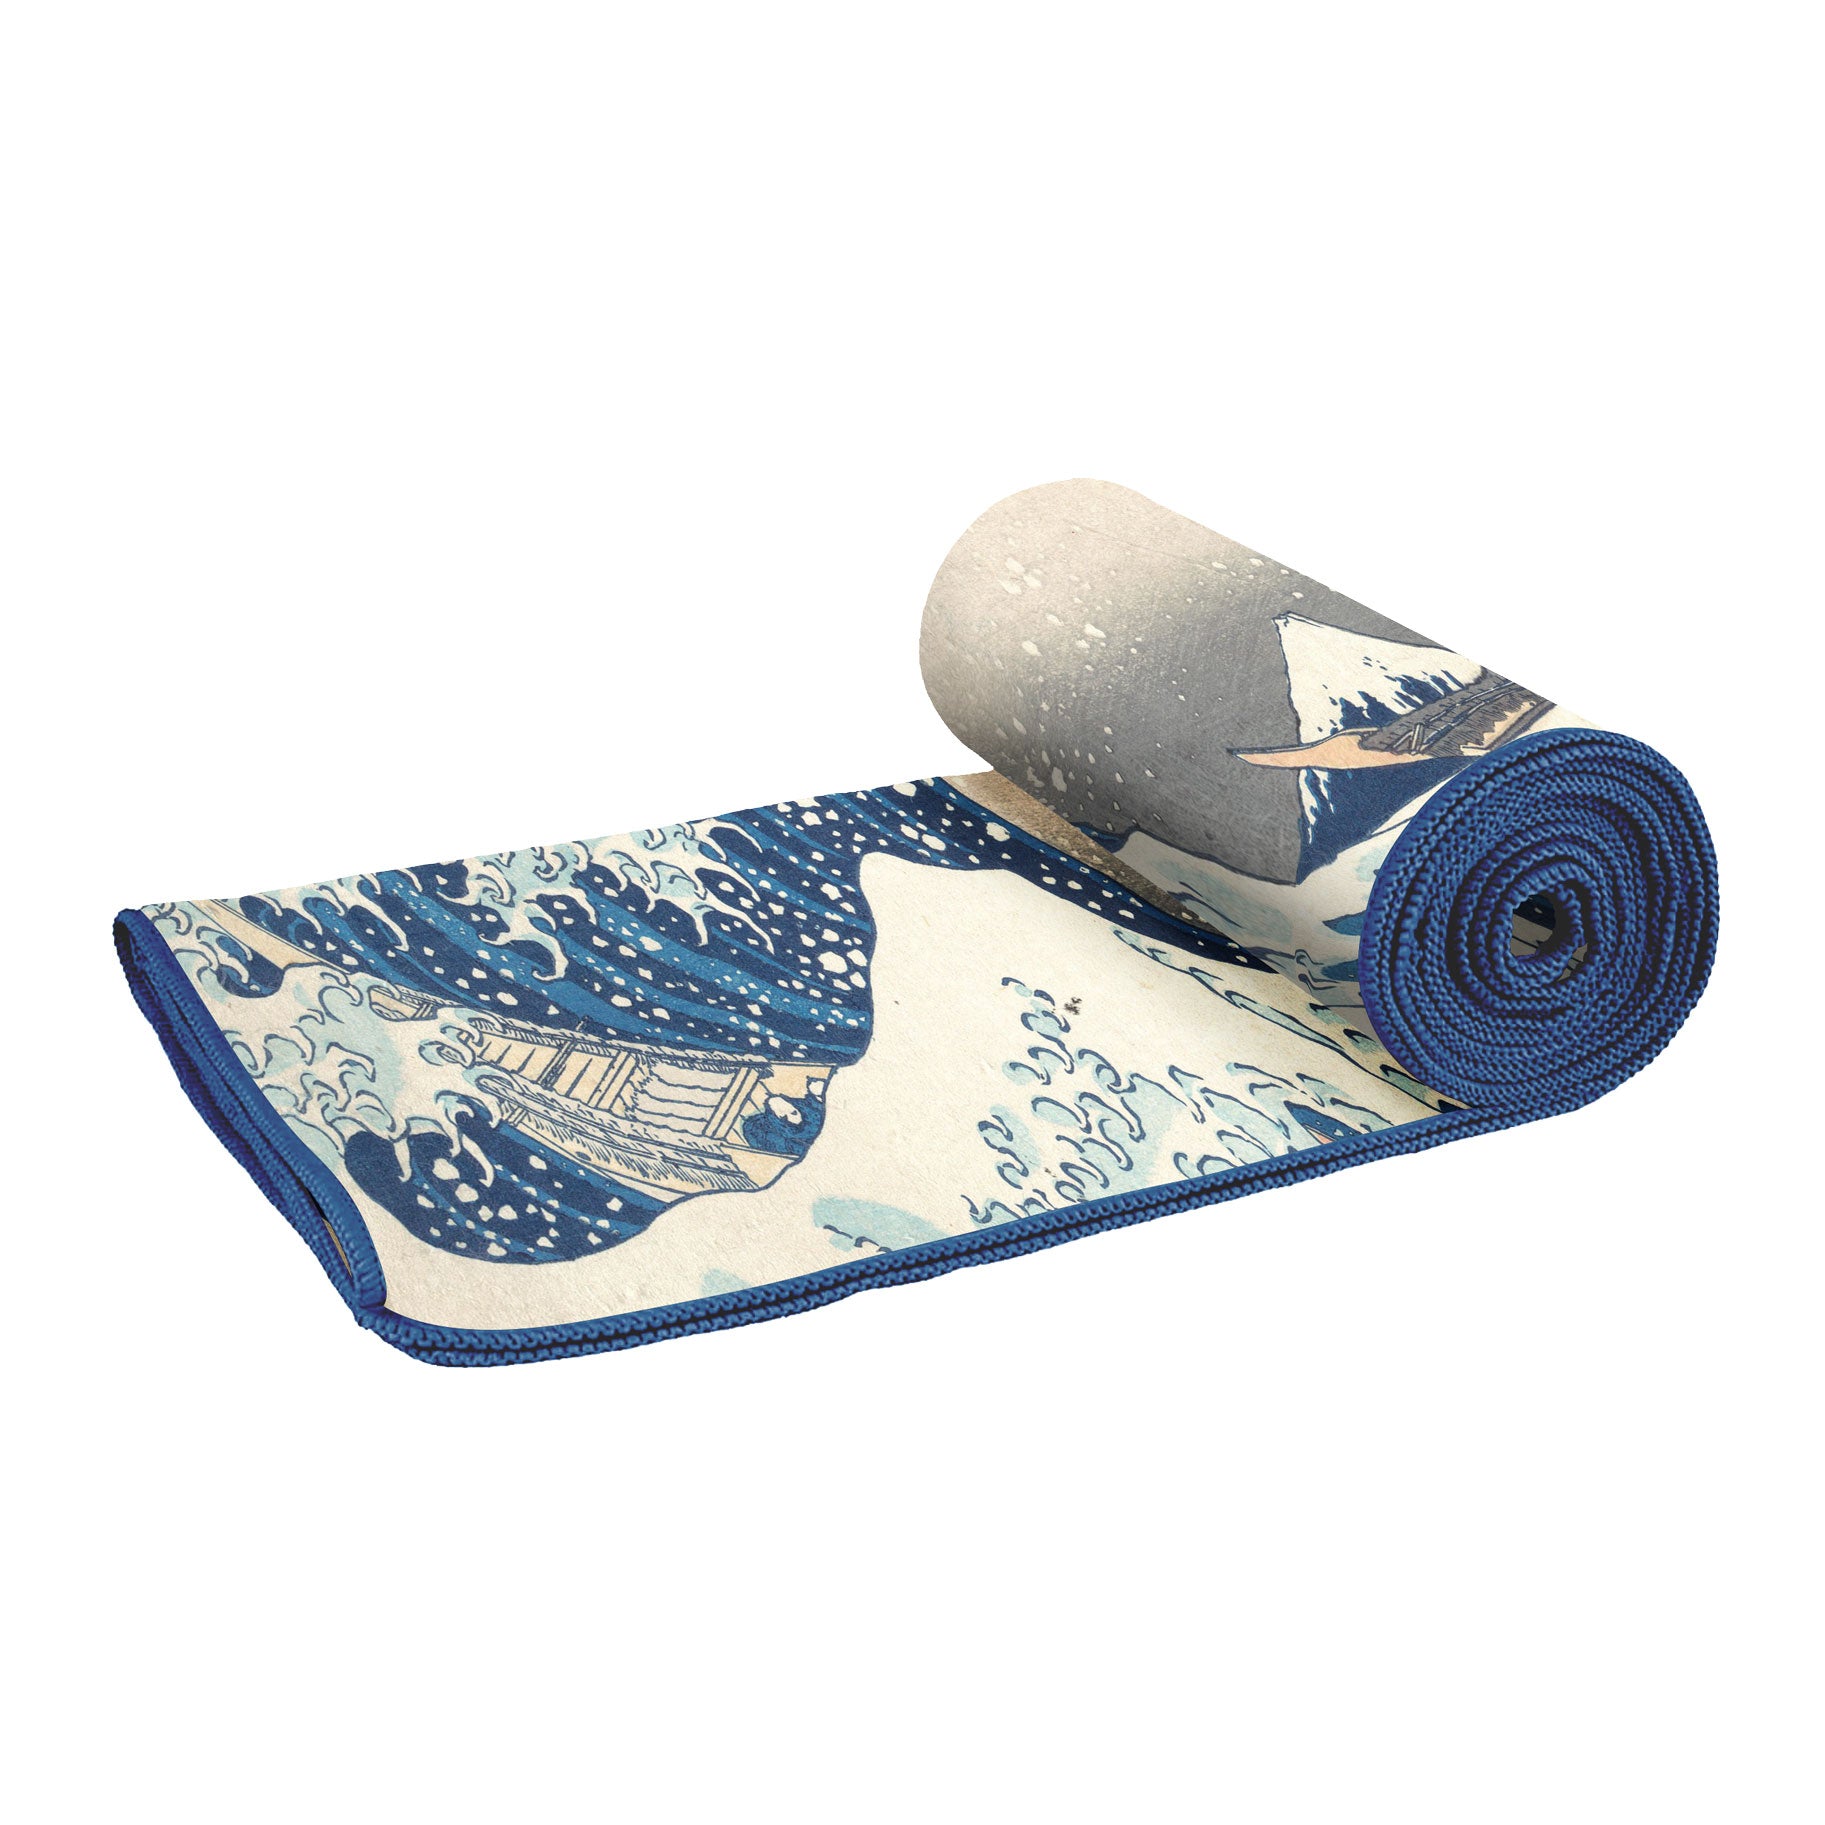 Oversized Beach Towel 40x63" - Microfiber, Quick-Dry, Hokusai The Great Wave